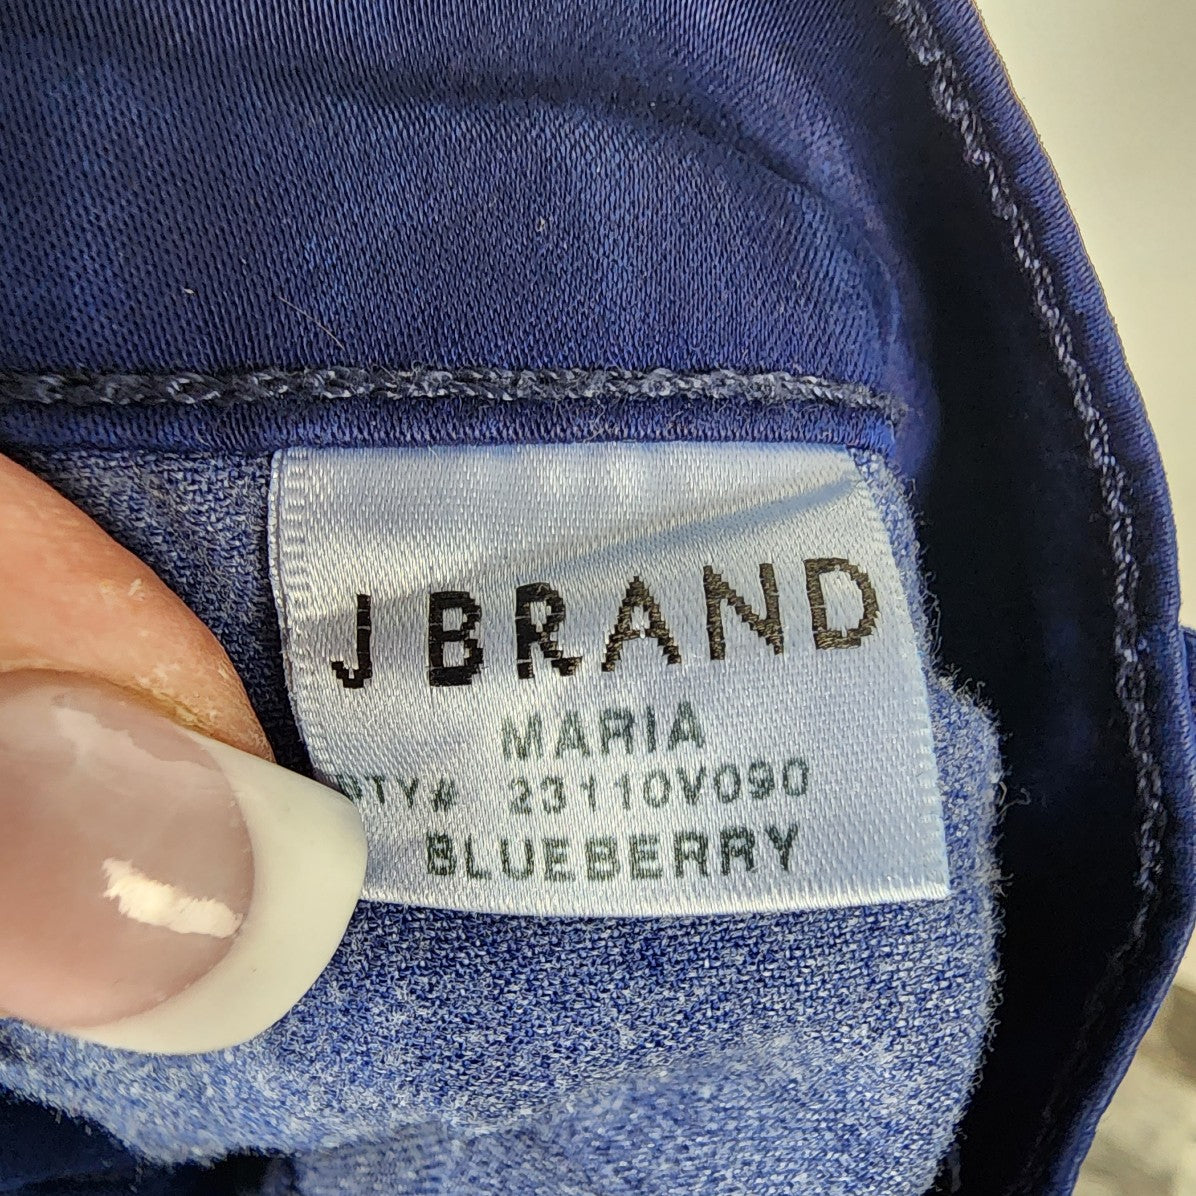 J Brand Blueberry Maria High Rise Skinny Jeans Size 31